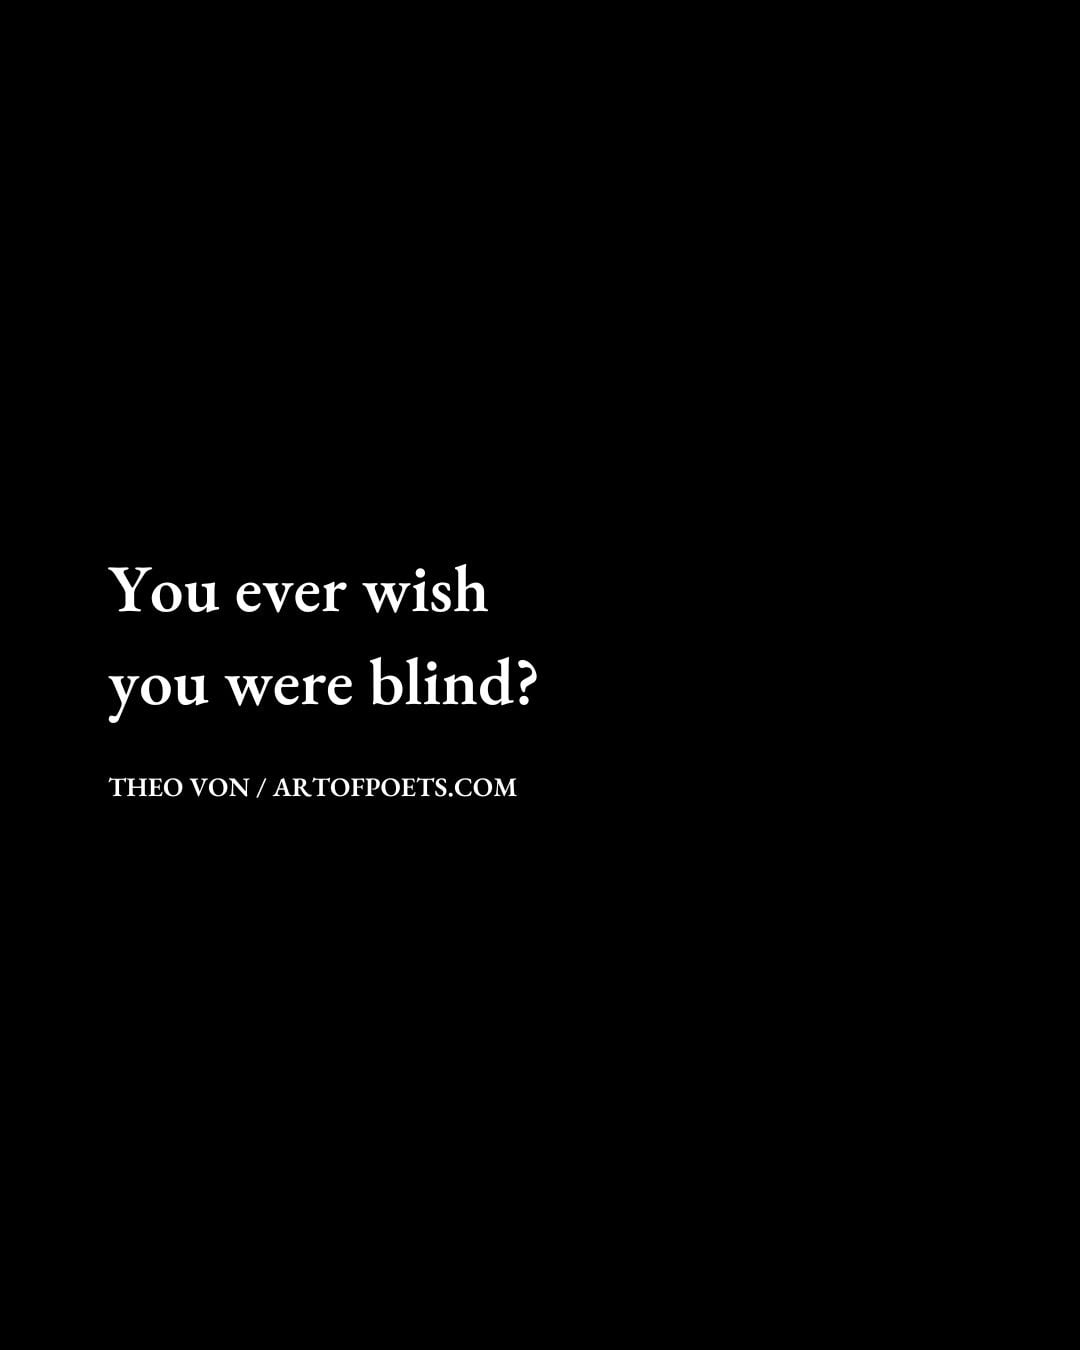 You ever wish you were blind